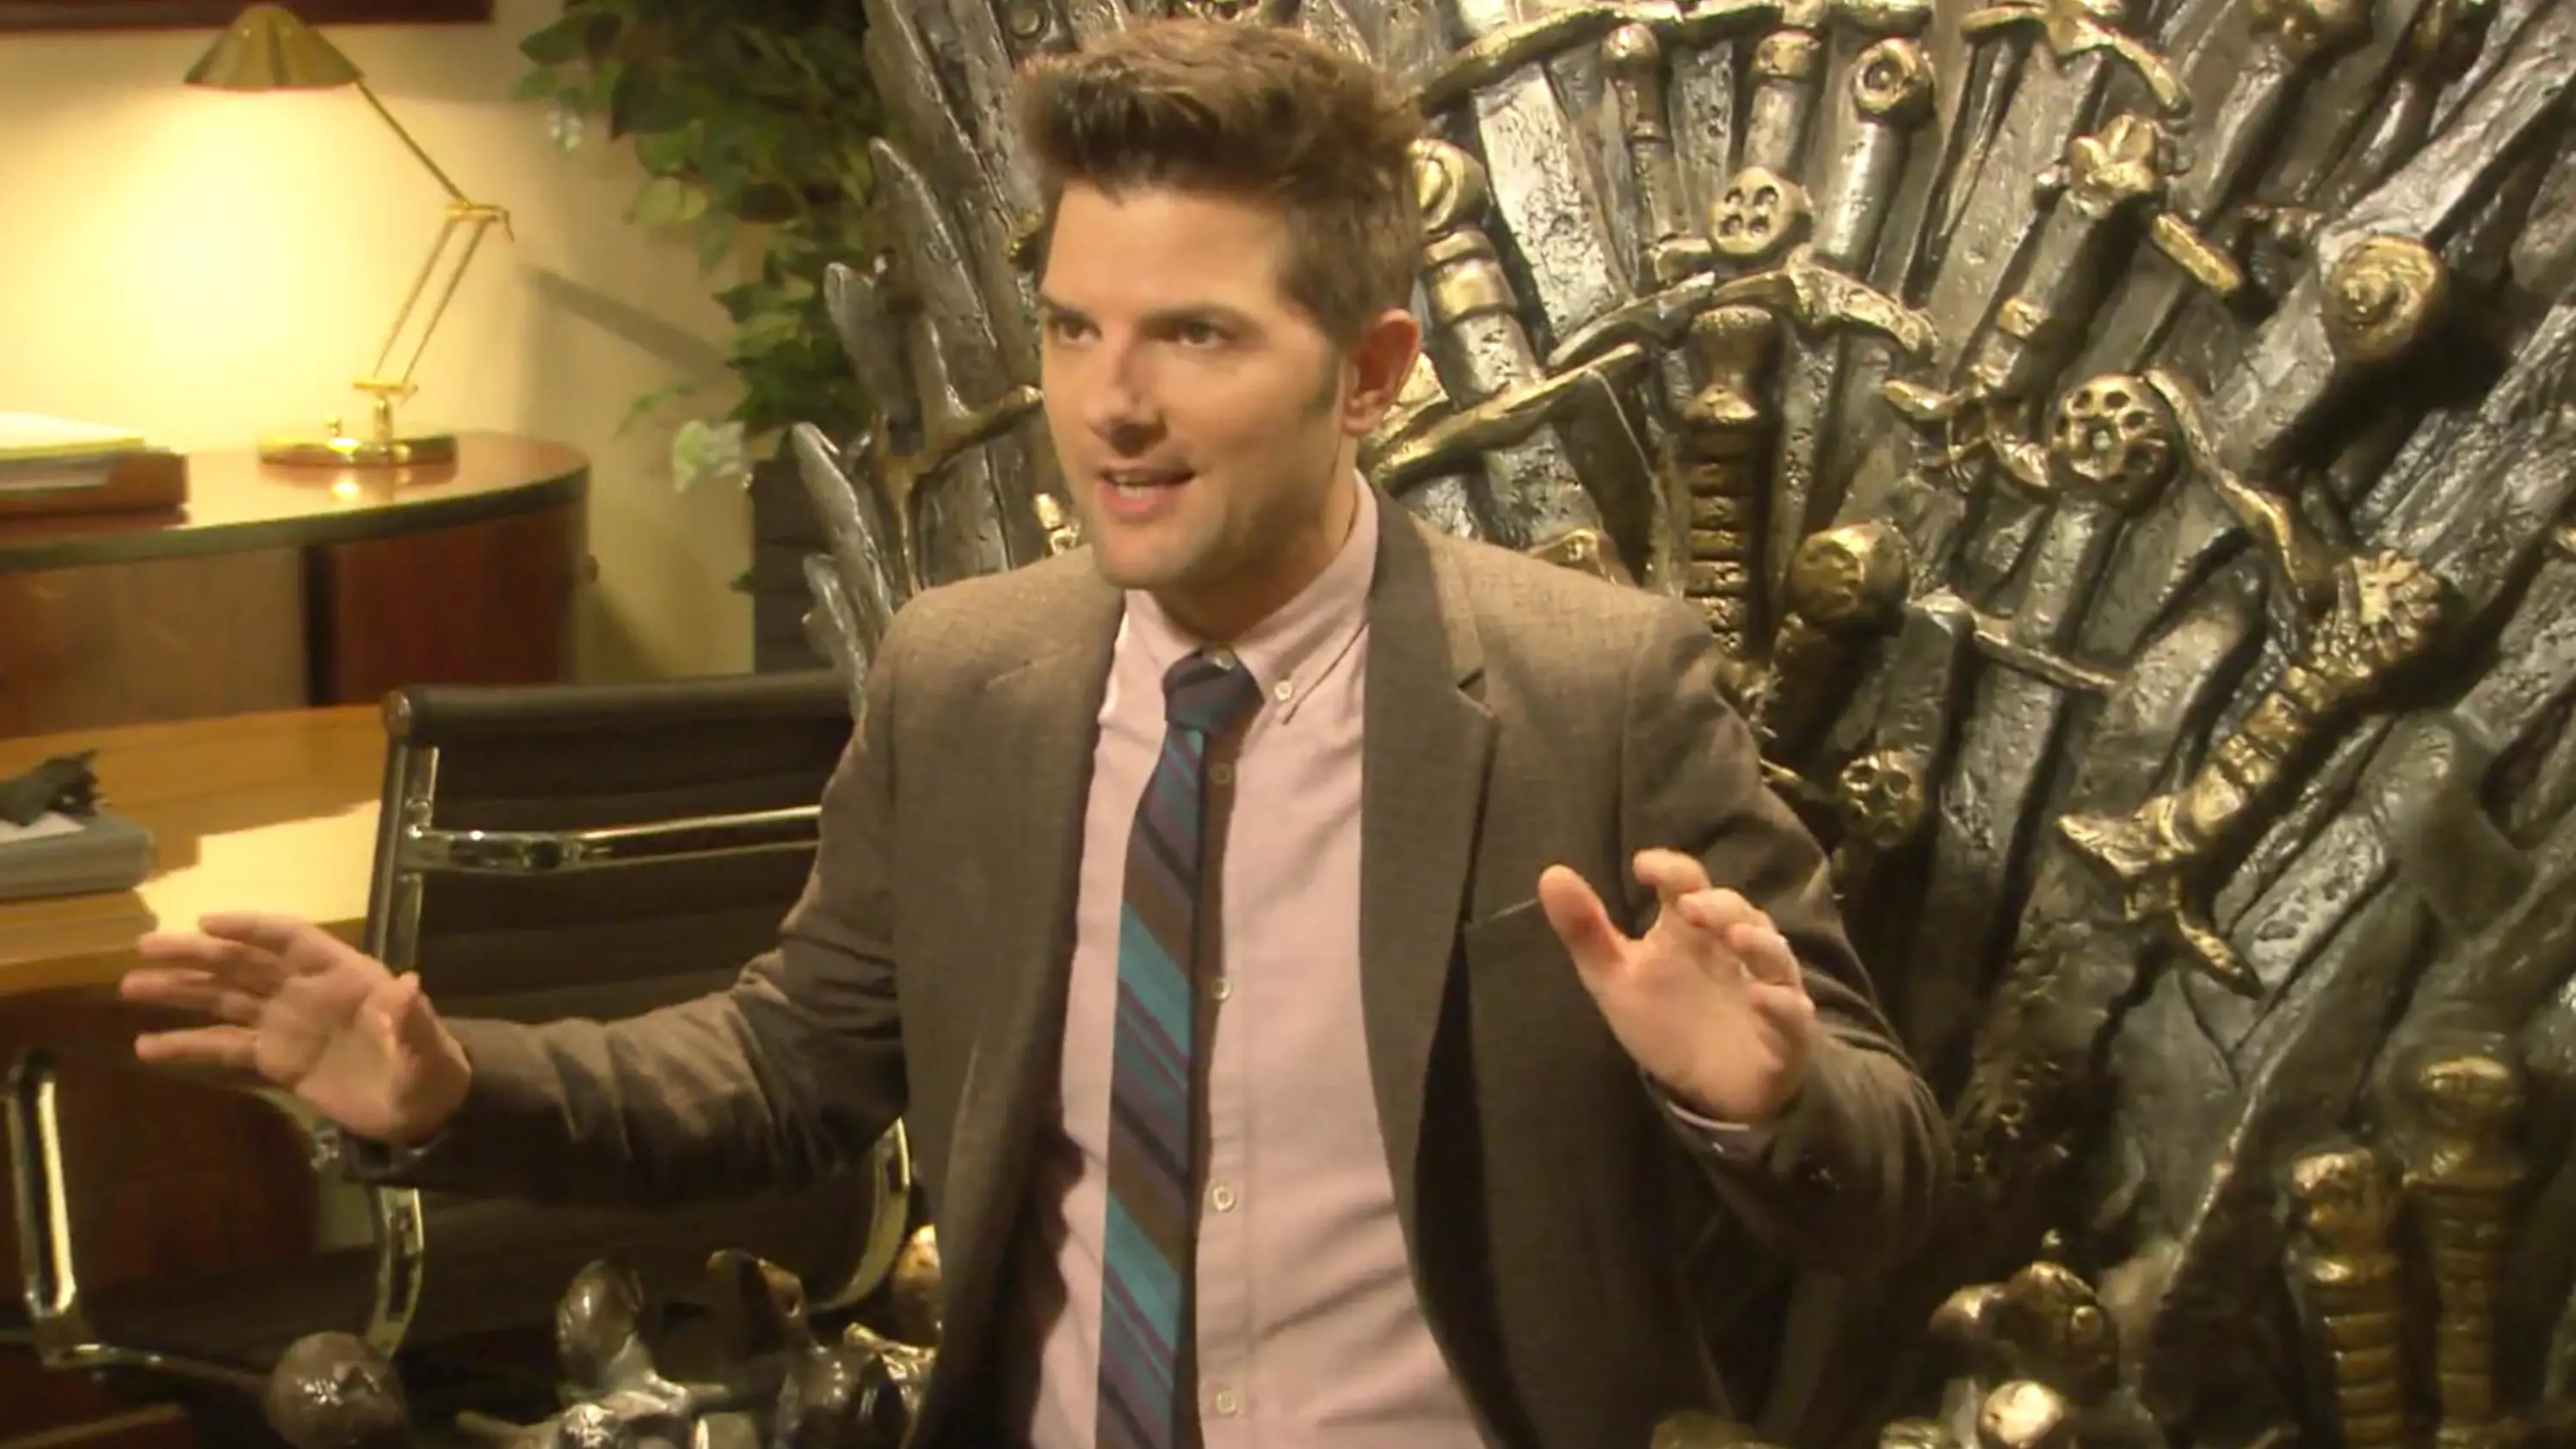 Parks And Recreation Predicted Game of Thrones Would Go 'Off The Rails'